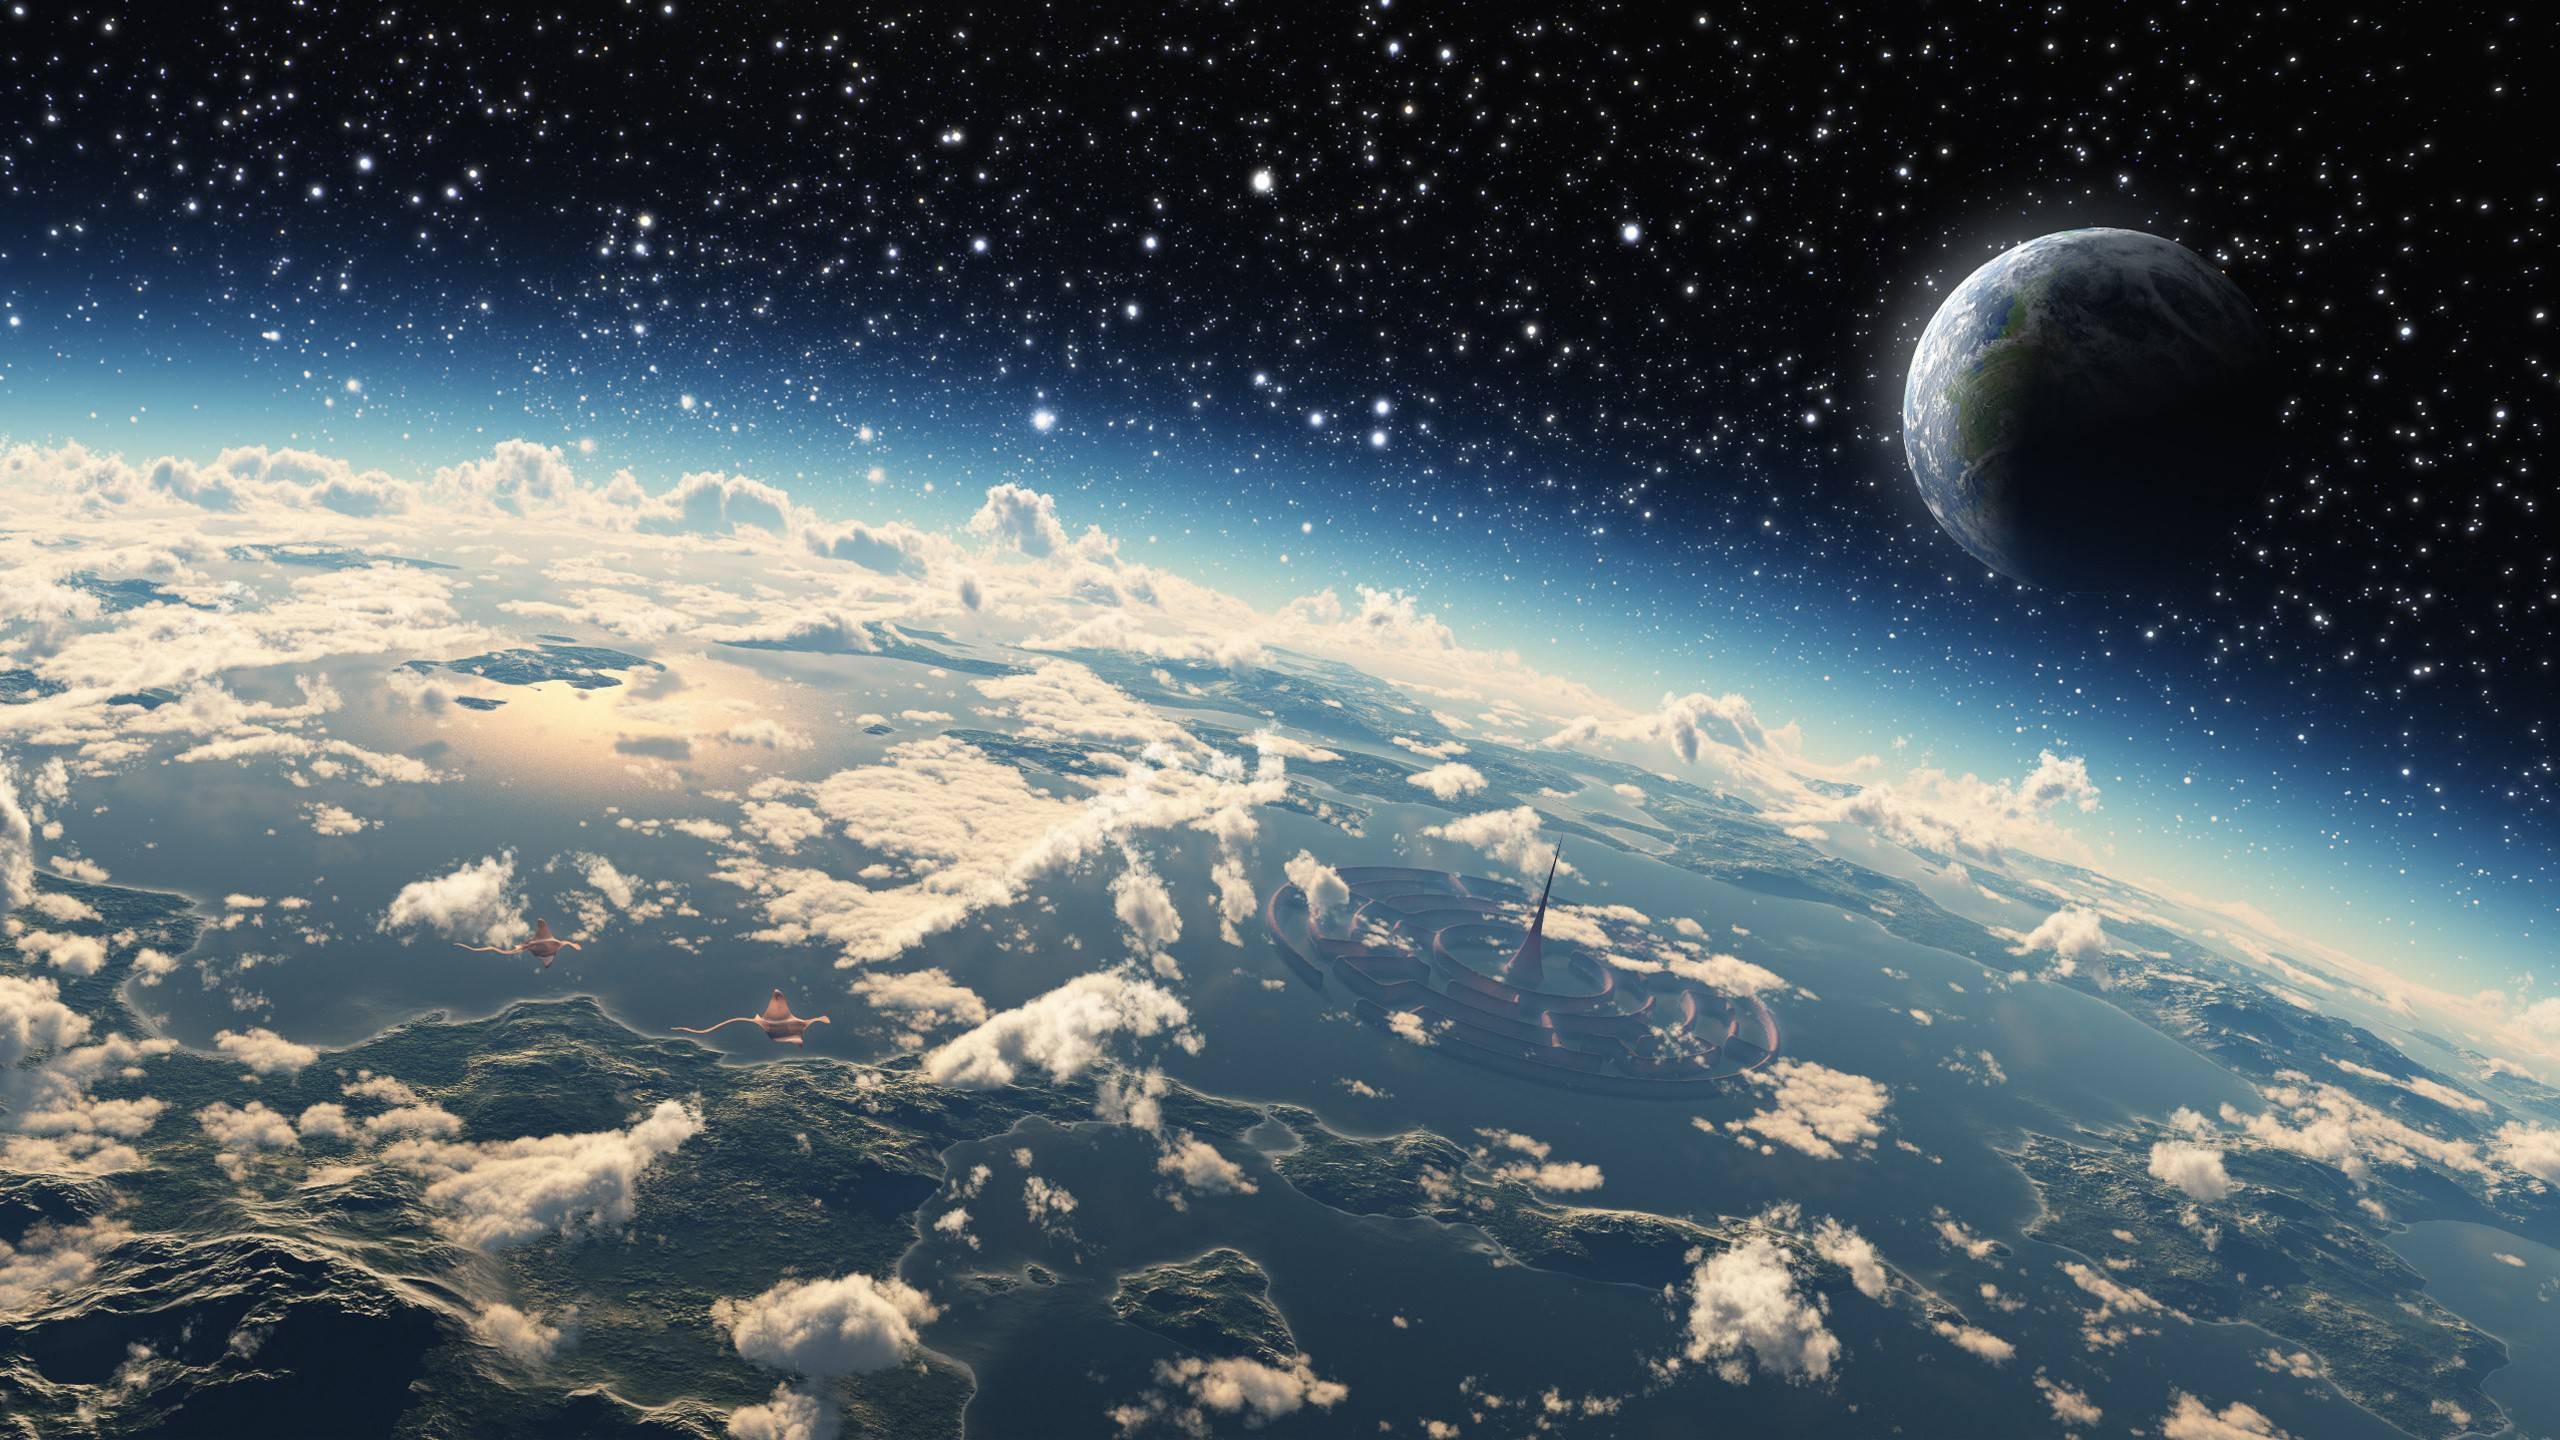 General 2560x1440 stars space art planet clouds atmosphere science fiction futuristic space city digital art